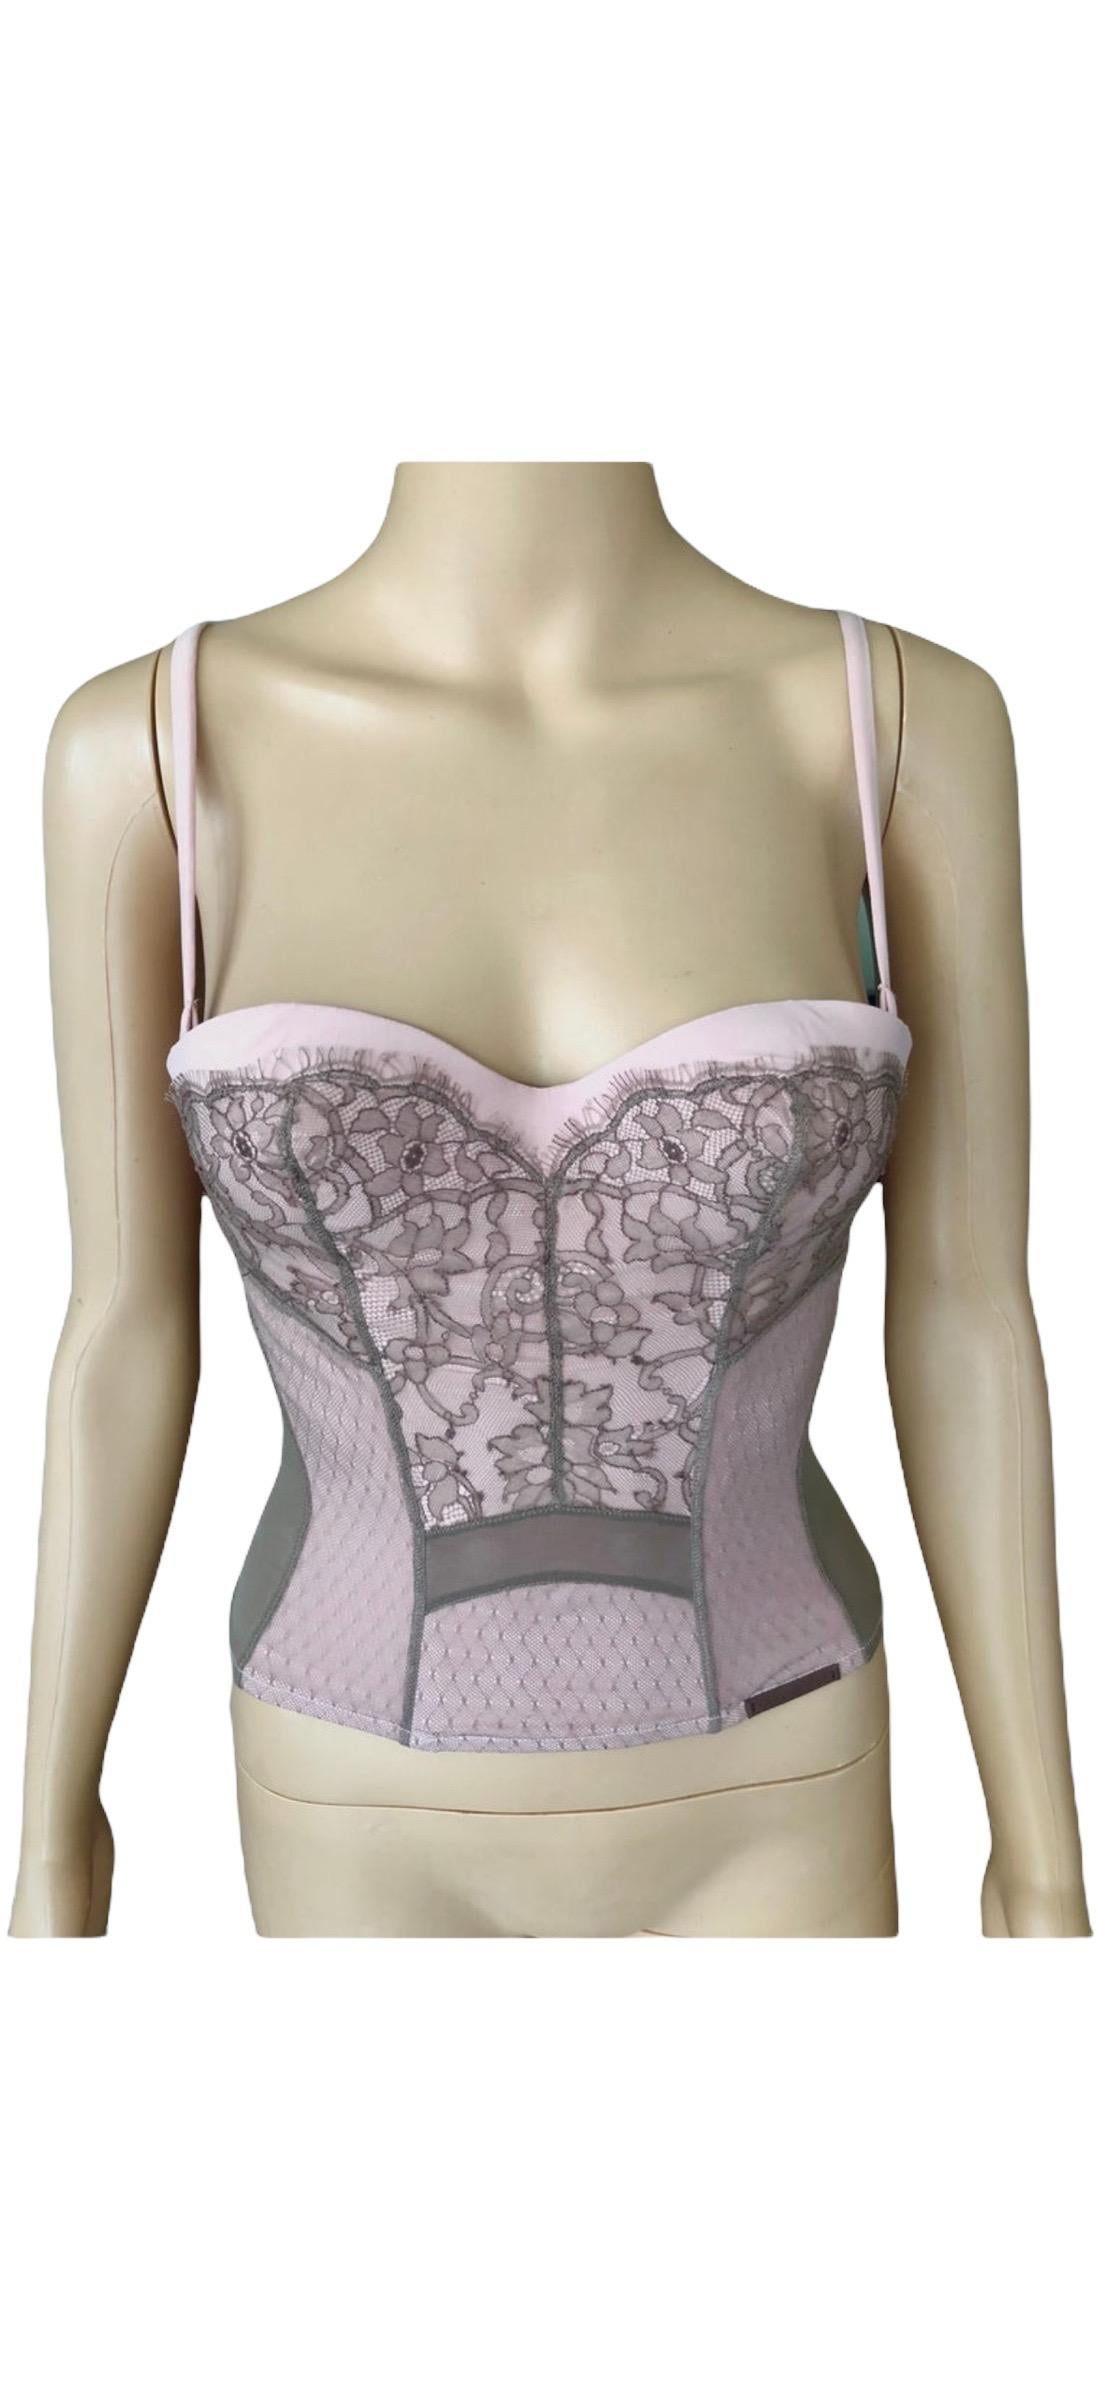 Christian Dior By John Galliano S/S 2006 Unworn Bustier Lace Corset Crop Top For Sale 2